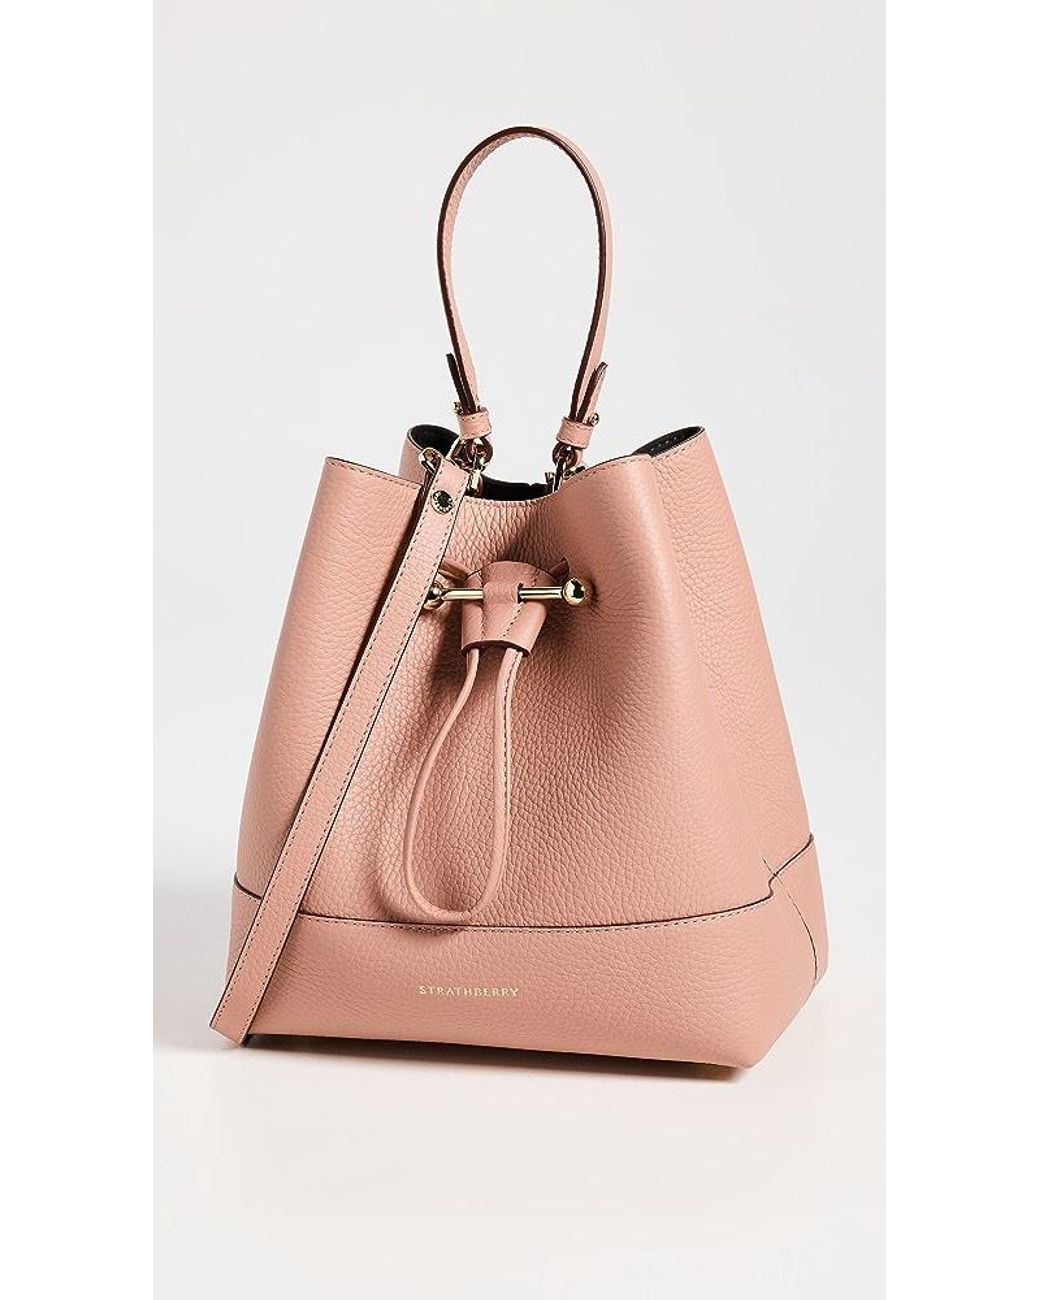 Strathberry Midi Lana Leather Bucket Bag in Brown